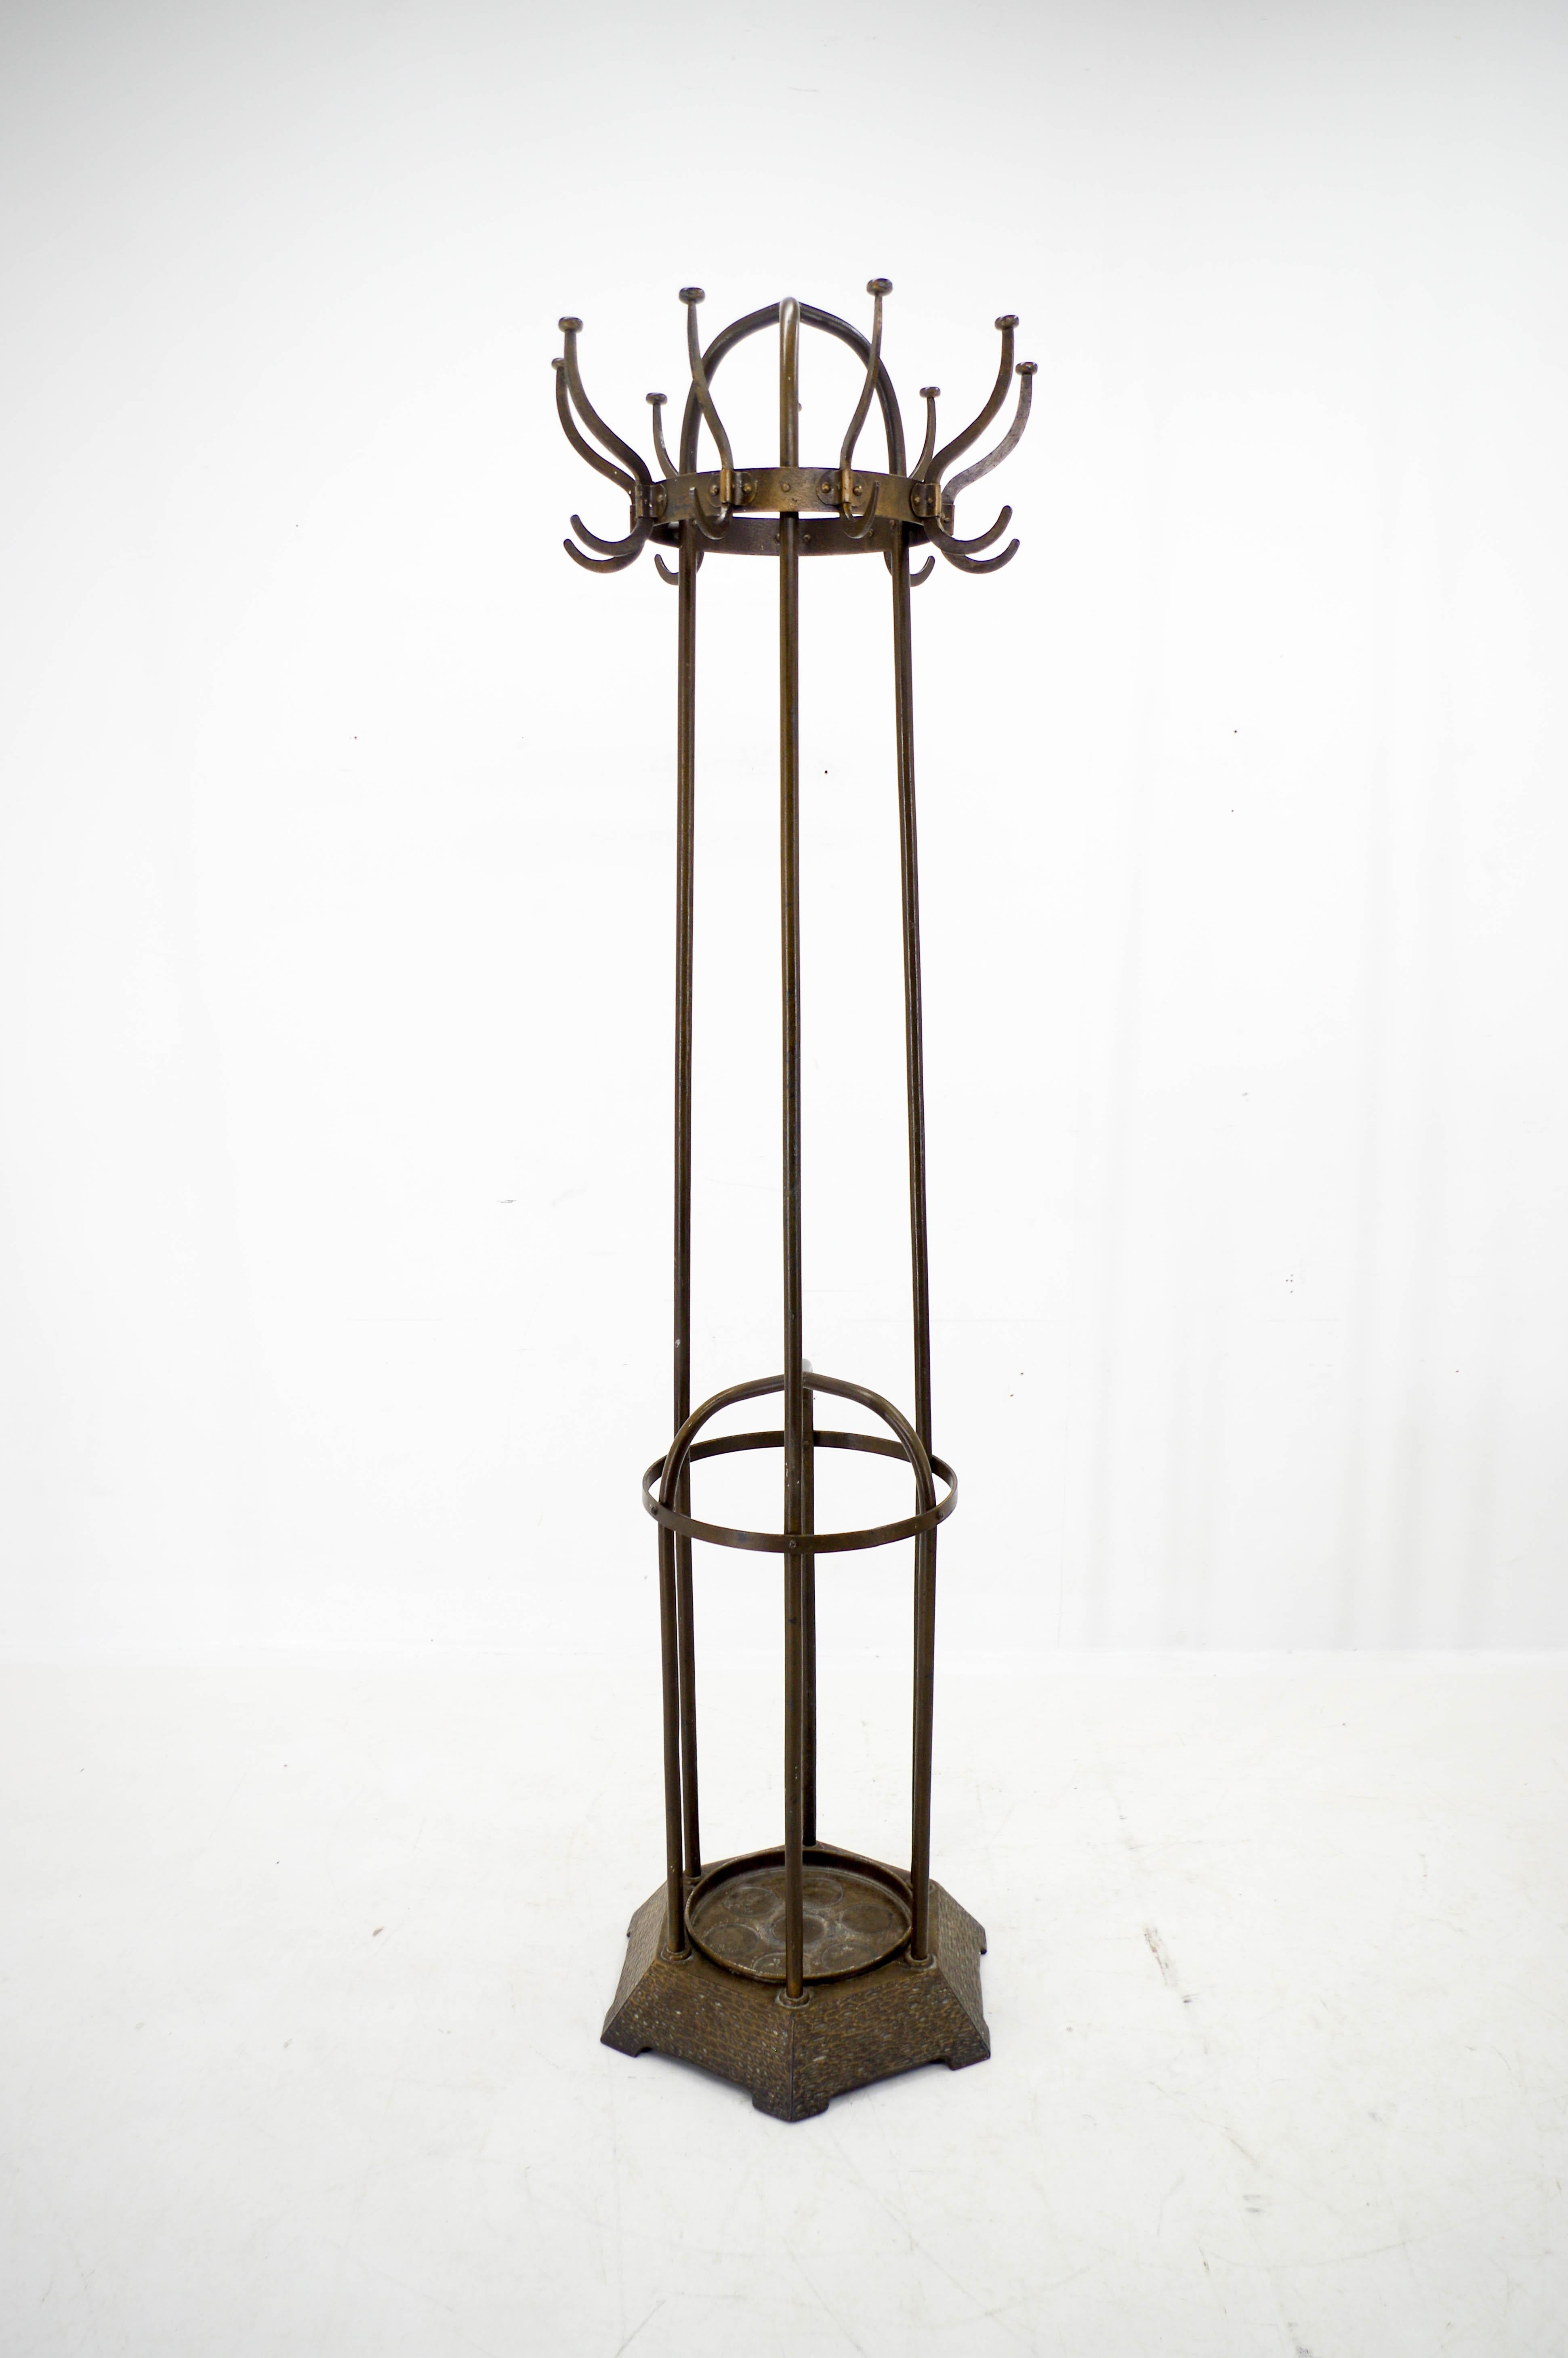 Iron coat rack  with heavy cast iron base and drip tray made by Vichr & Co.
Catalogue model Nr. 345 with antique brass finish.
Very good original condition.
Two items available
